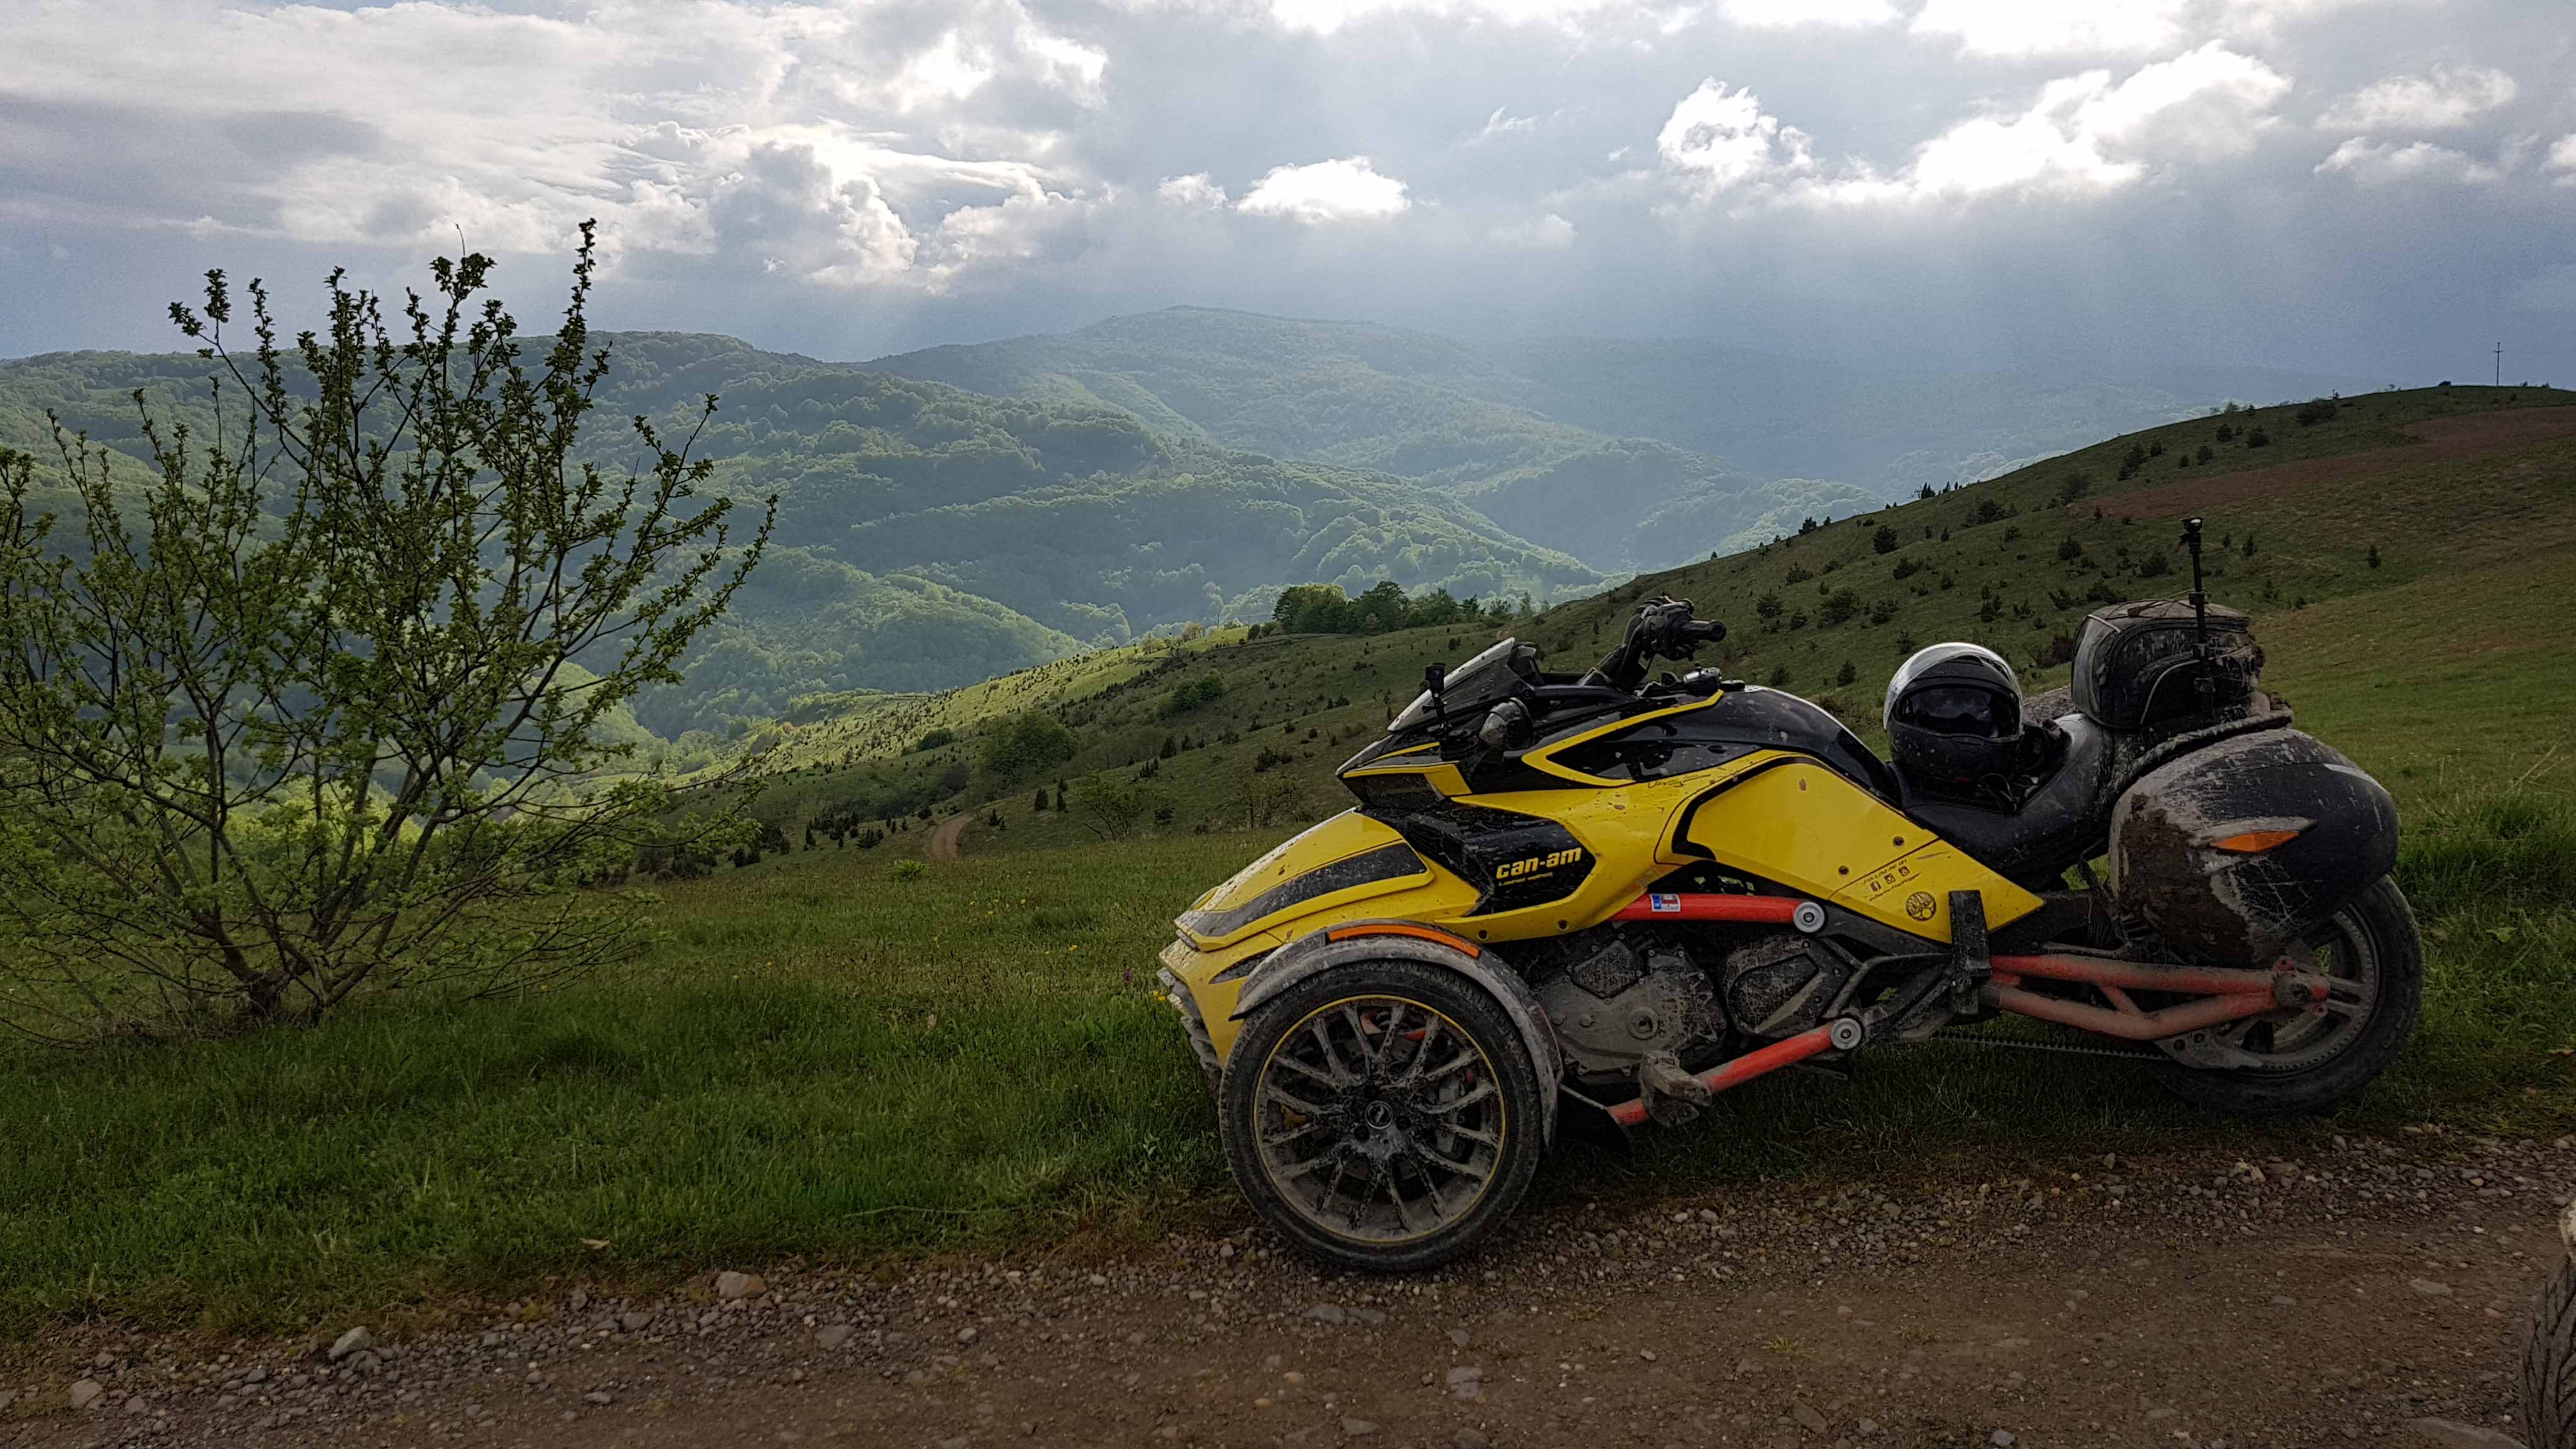 Martin the Vlogger's Can-Am Spyder F3